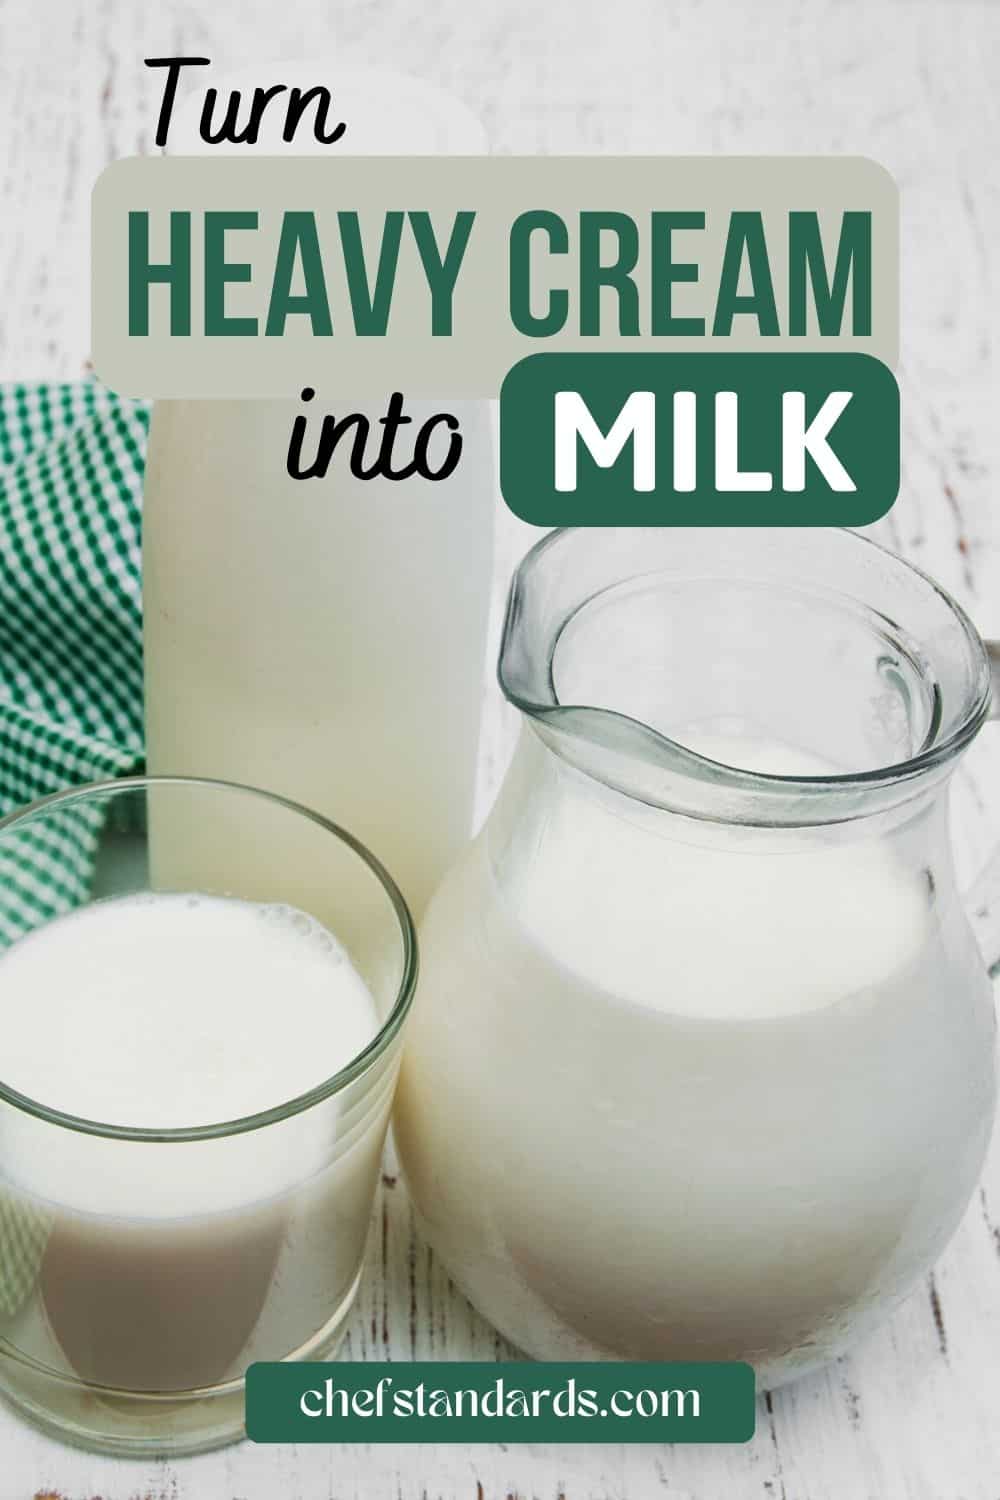 Can I Substitute Heavy Cream For Milk + 3 Other Substitutes